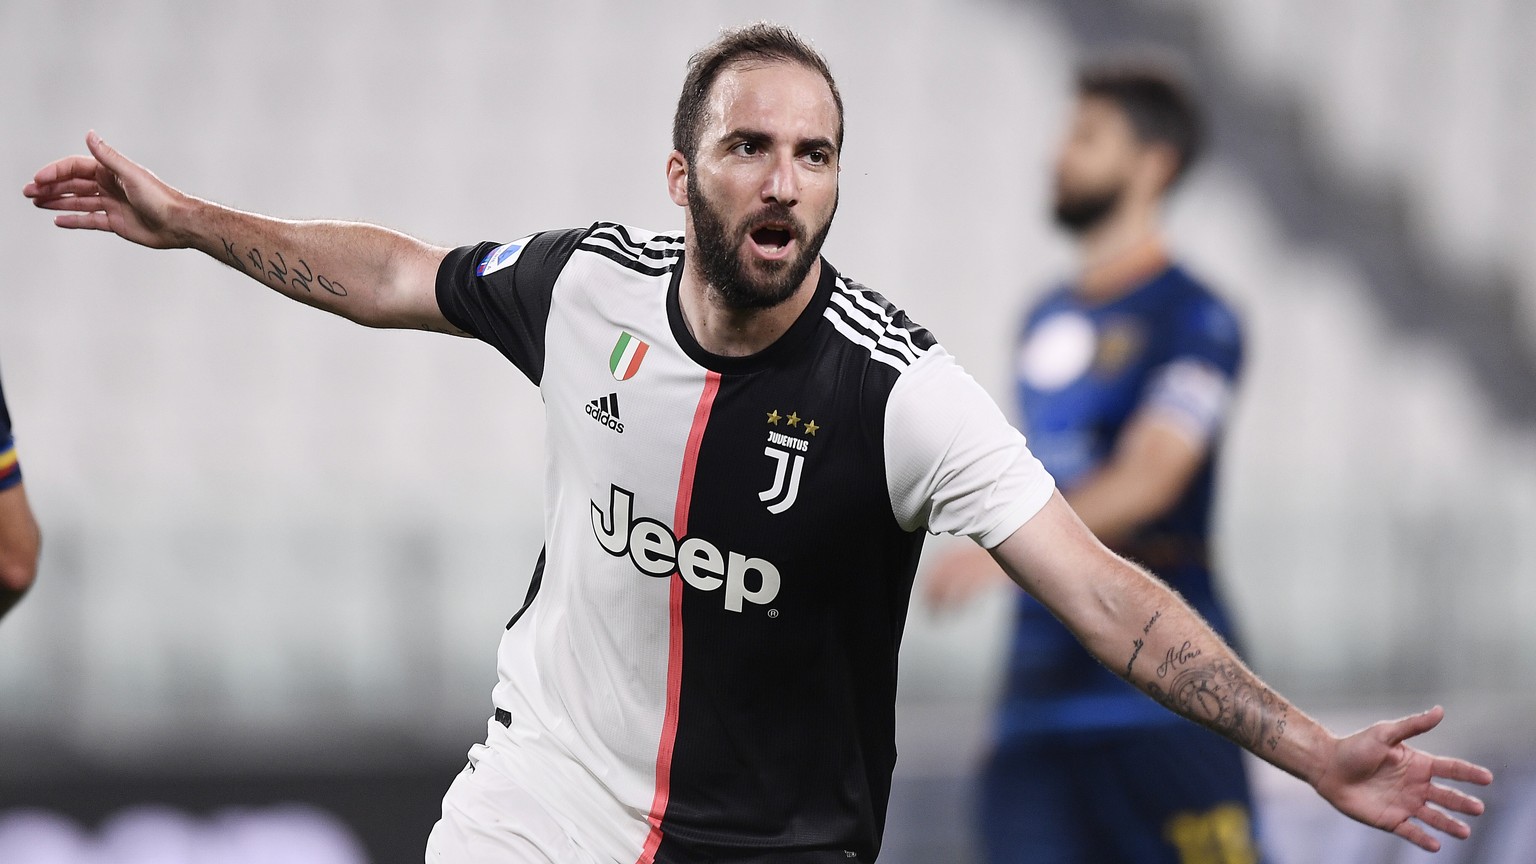 Juventus&#039; Gonzalo Higuain celebrates after a goal during the Serie A soccer match between Juventus and Lecce, at the Allianz Stadium in Turin, Italy, Friday, June 26, 2020. (Fabio Ferrari/LaPress ...